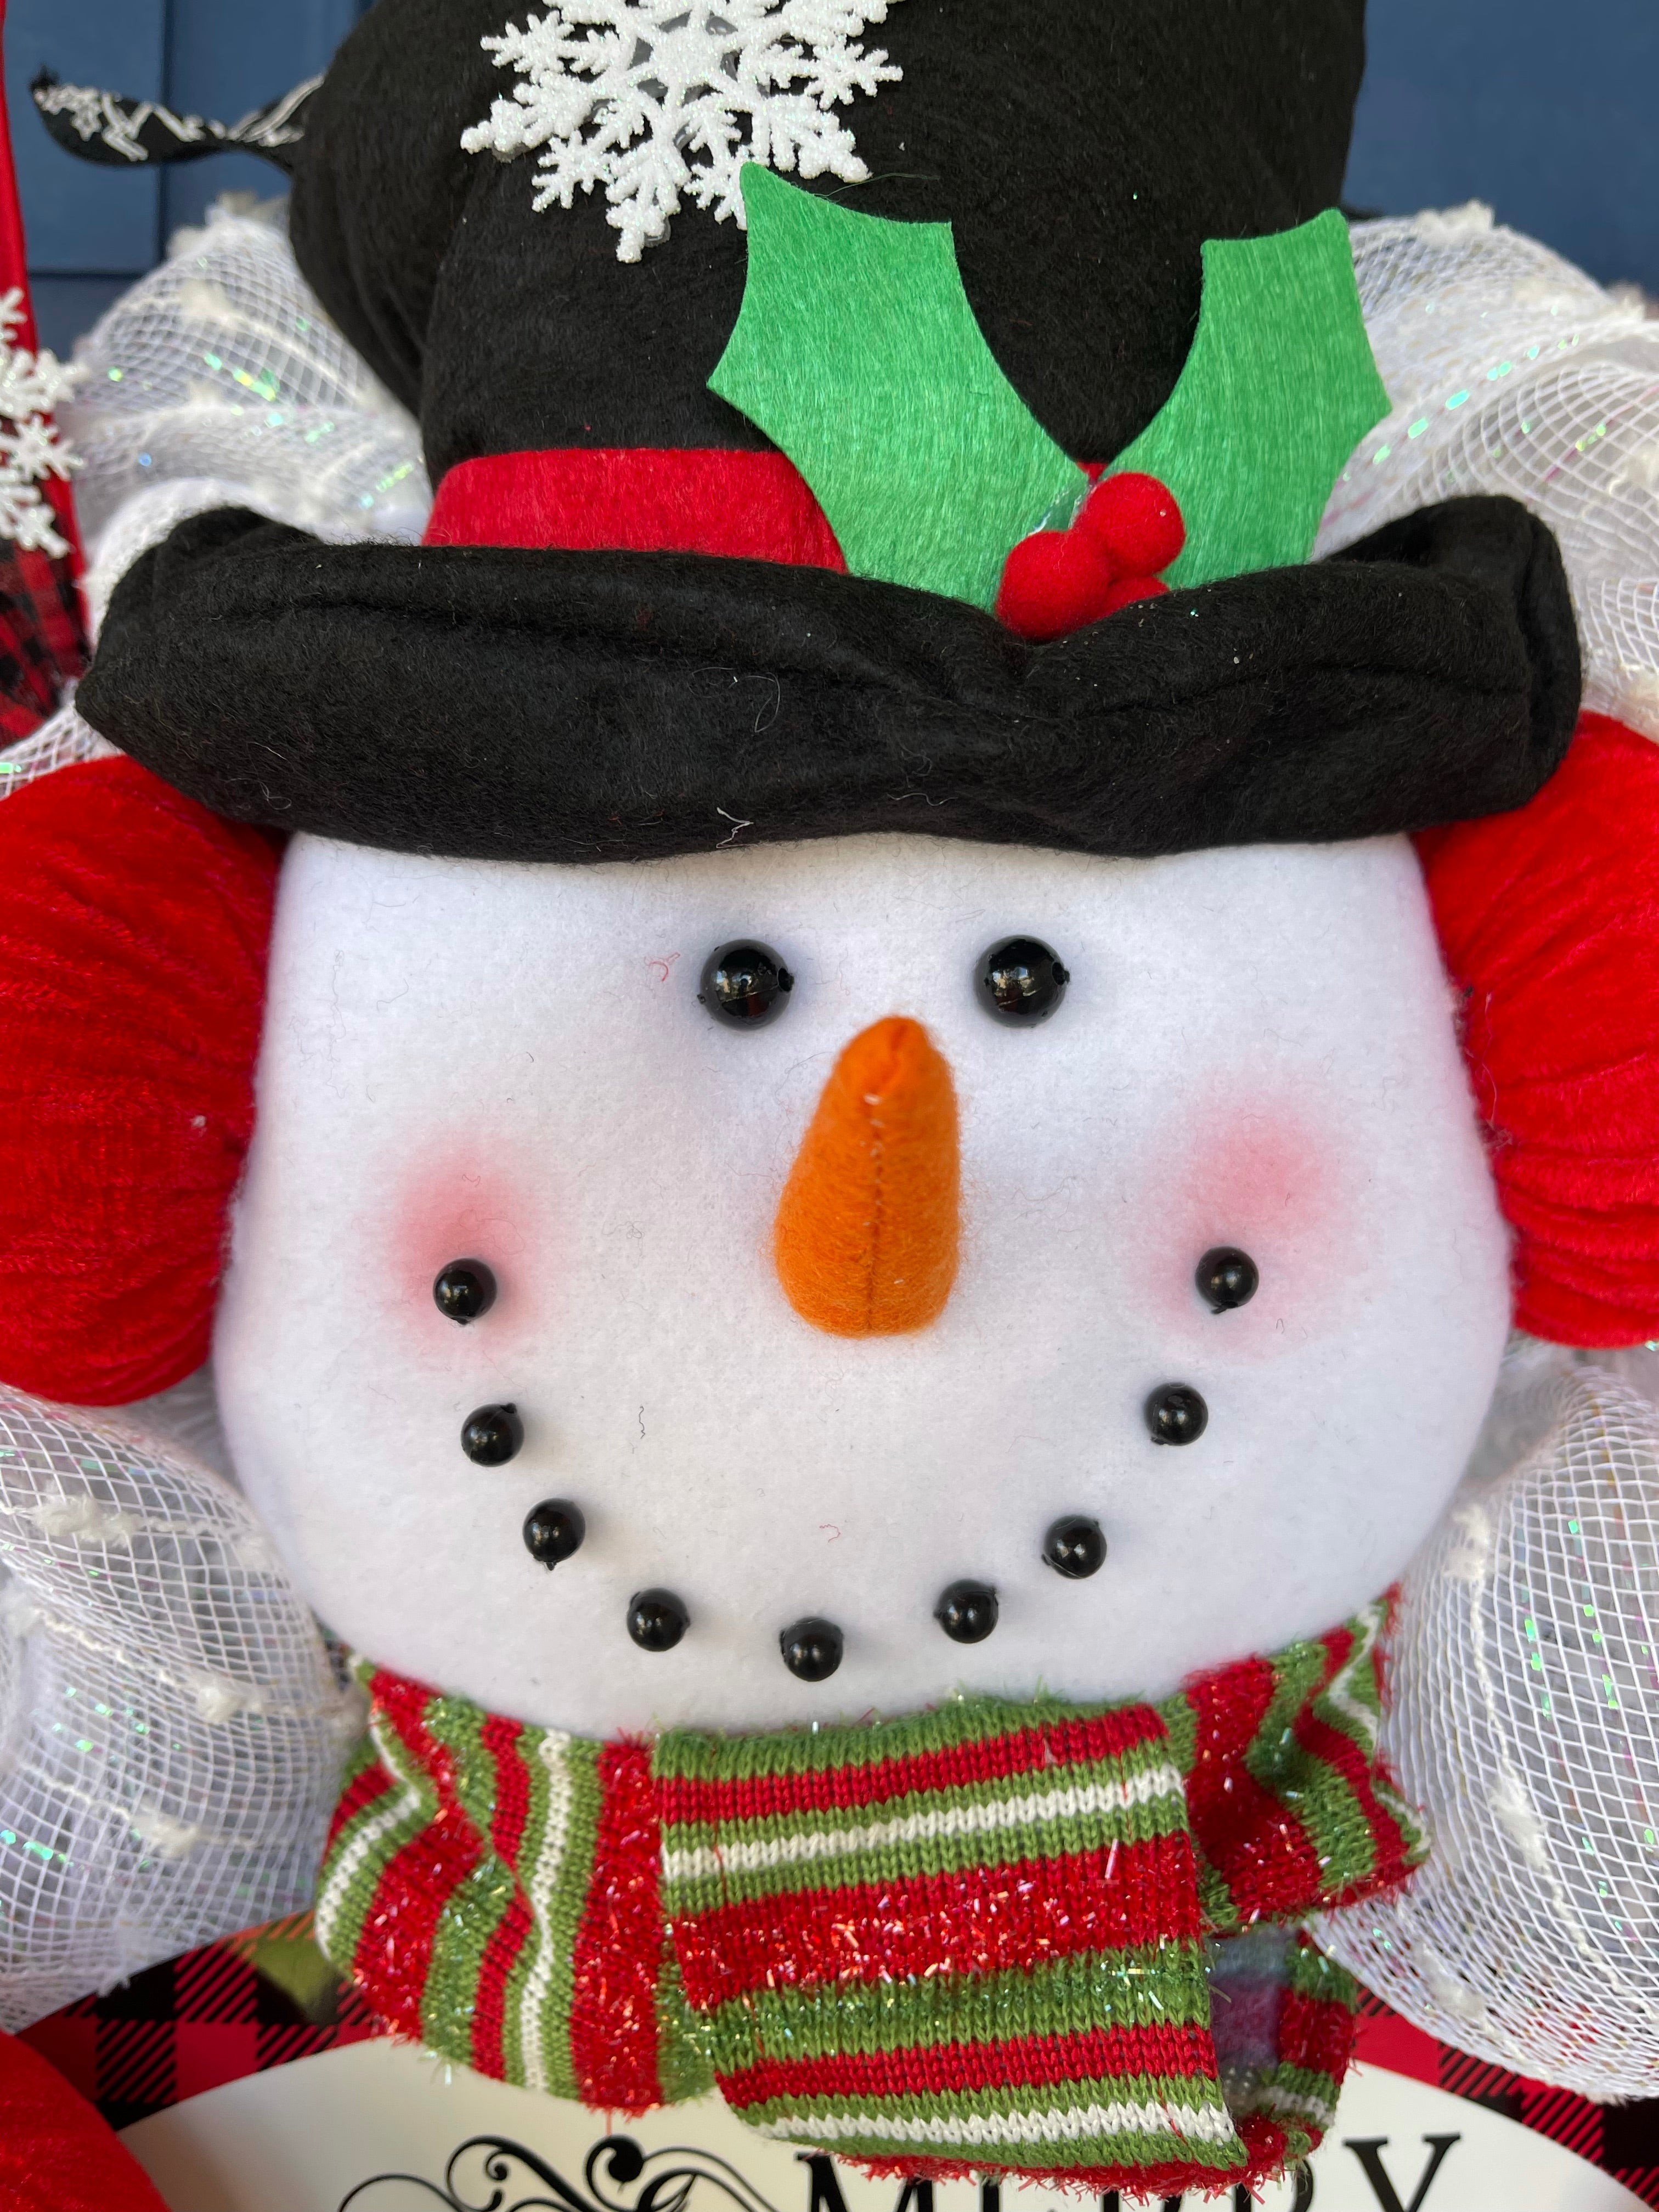 Close Up Detail of Plush Snowman Face with A Carrot Nose, wearing a Black Top Hat with a Snowflake, and Red Brim with Holly Berries, wearing Red Ear Muffs and a Green, White and Red Scarf